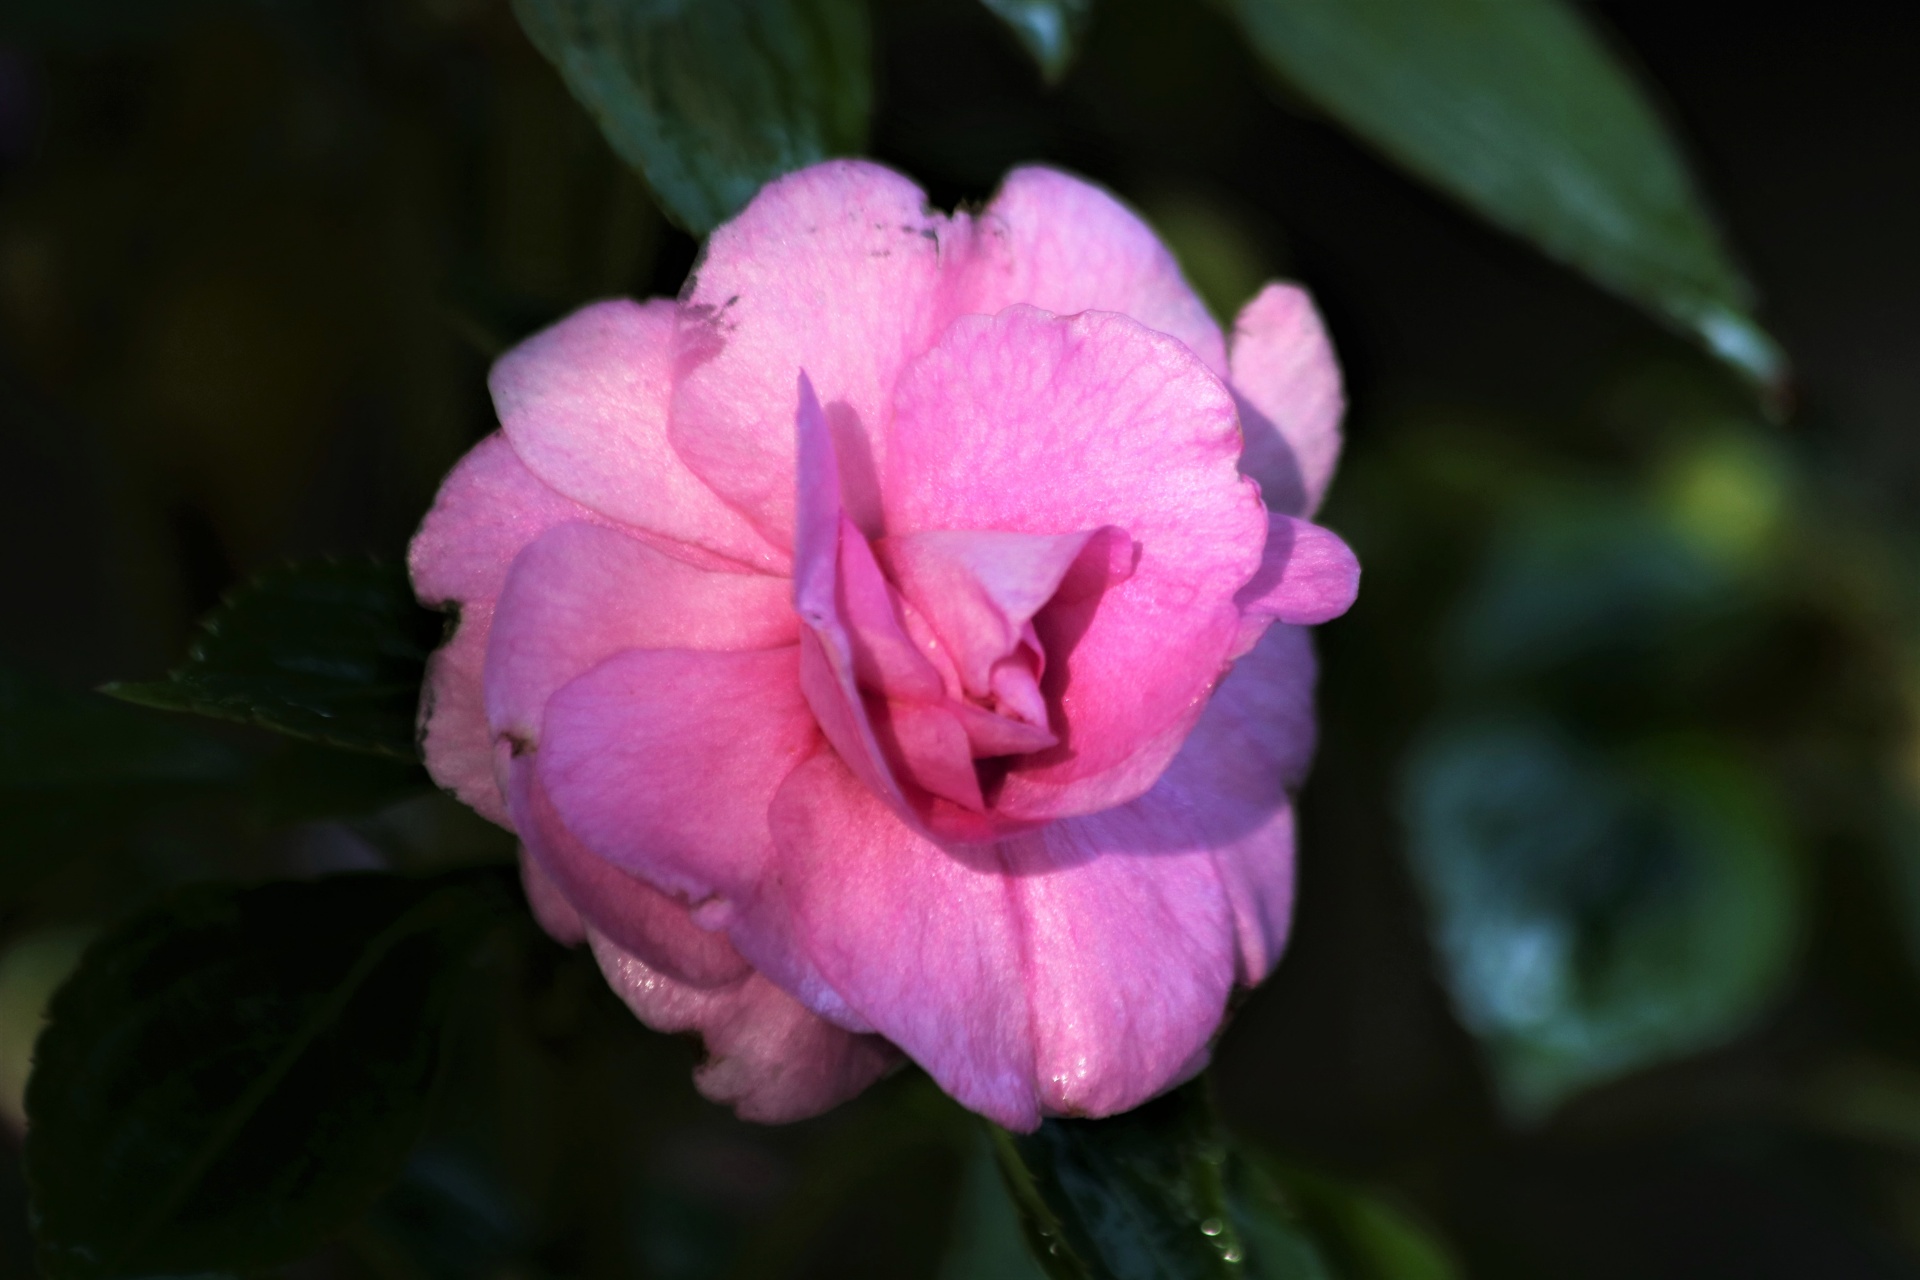 Close-up of a light pink begonia bloom, wet after a spring rain, on a dark green background.